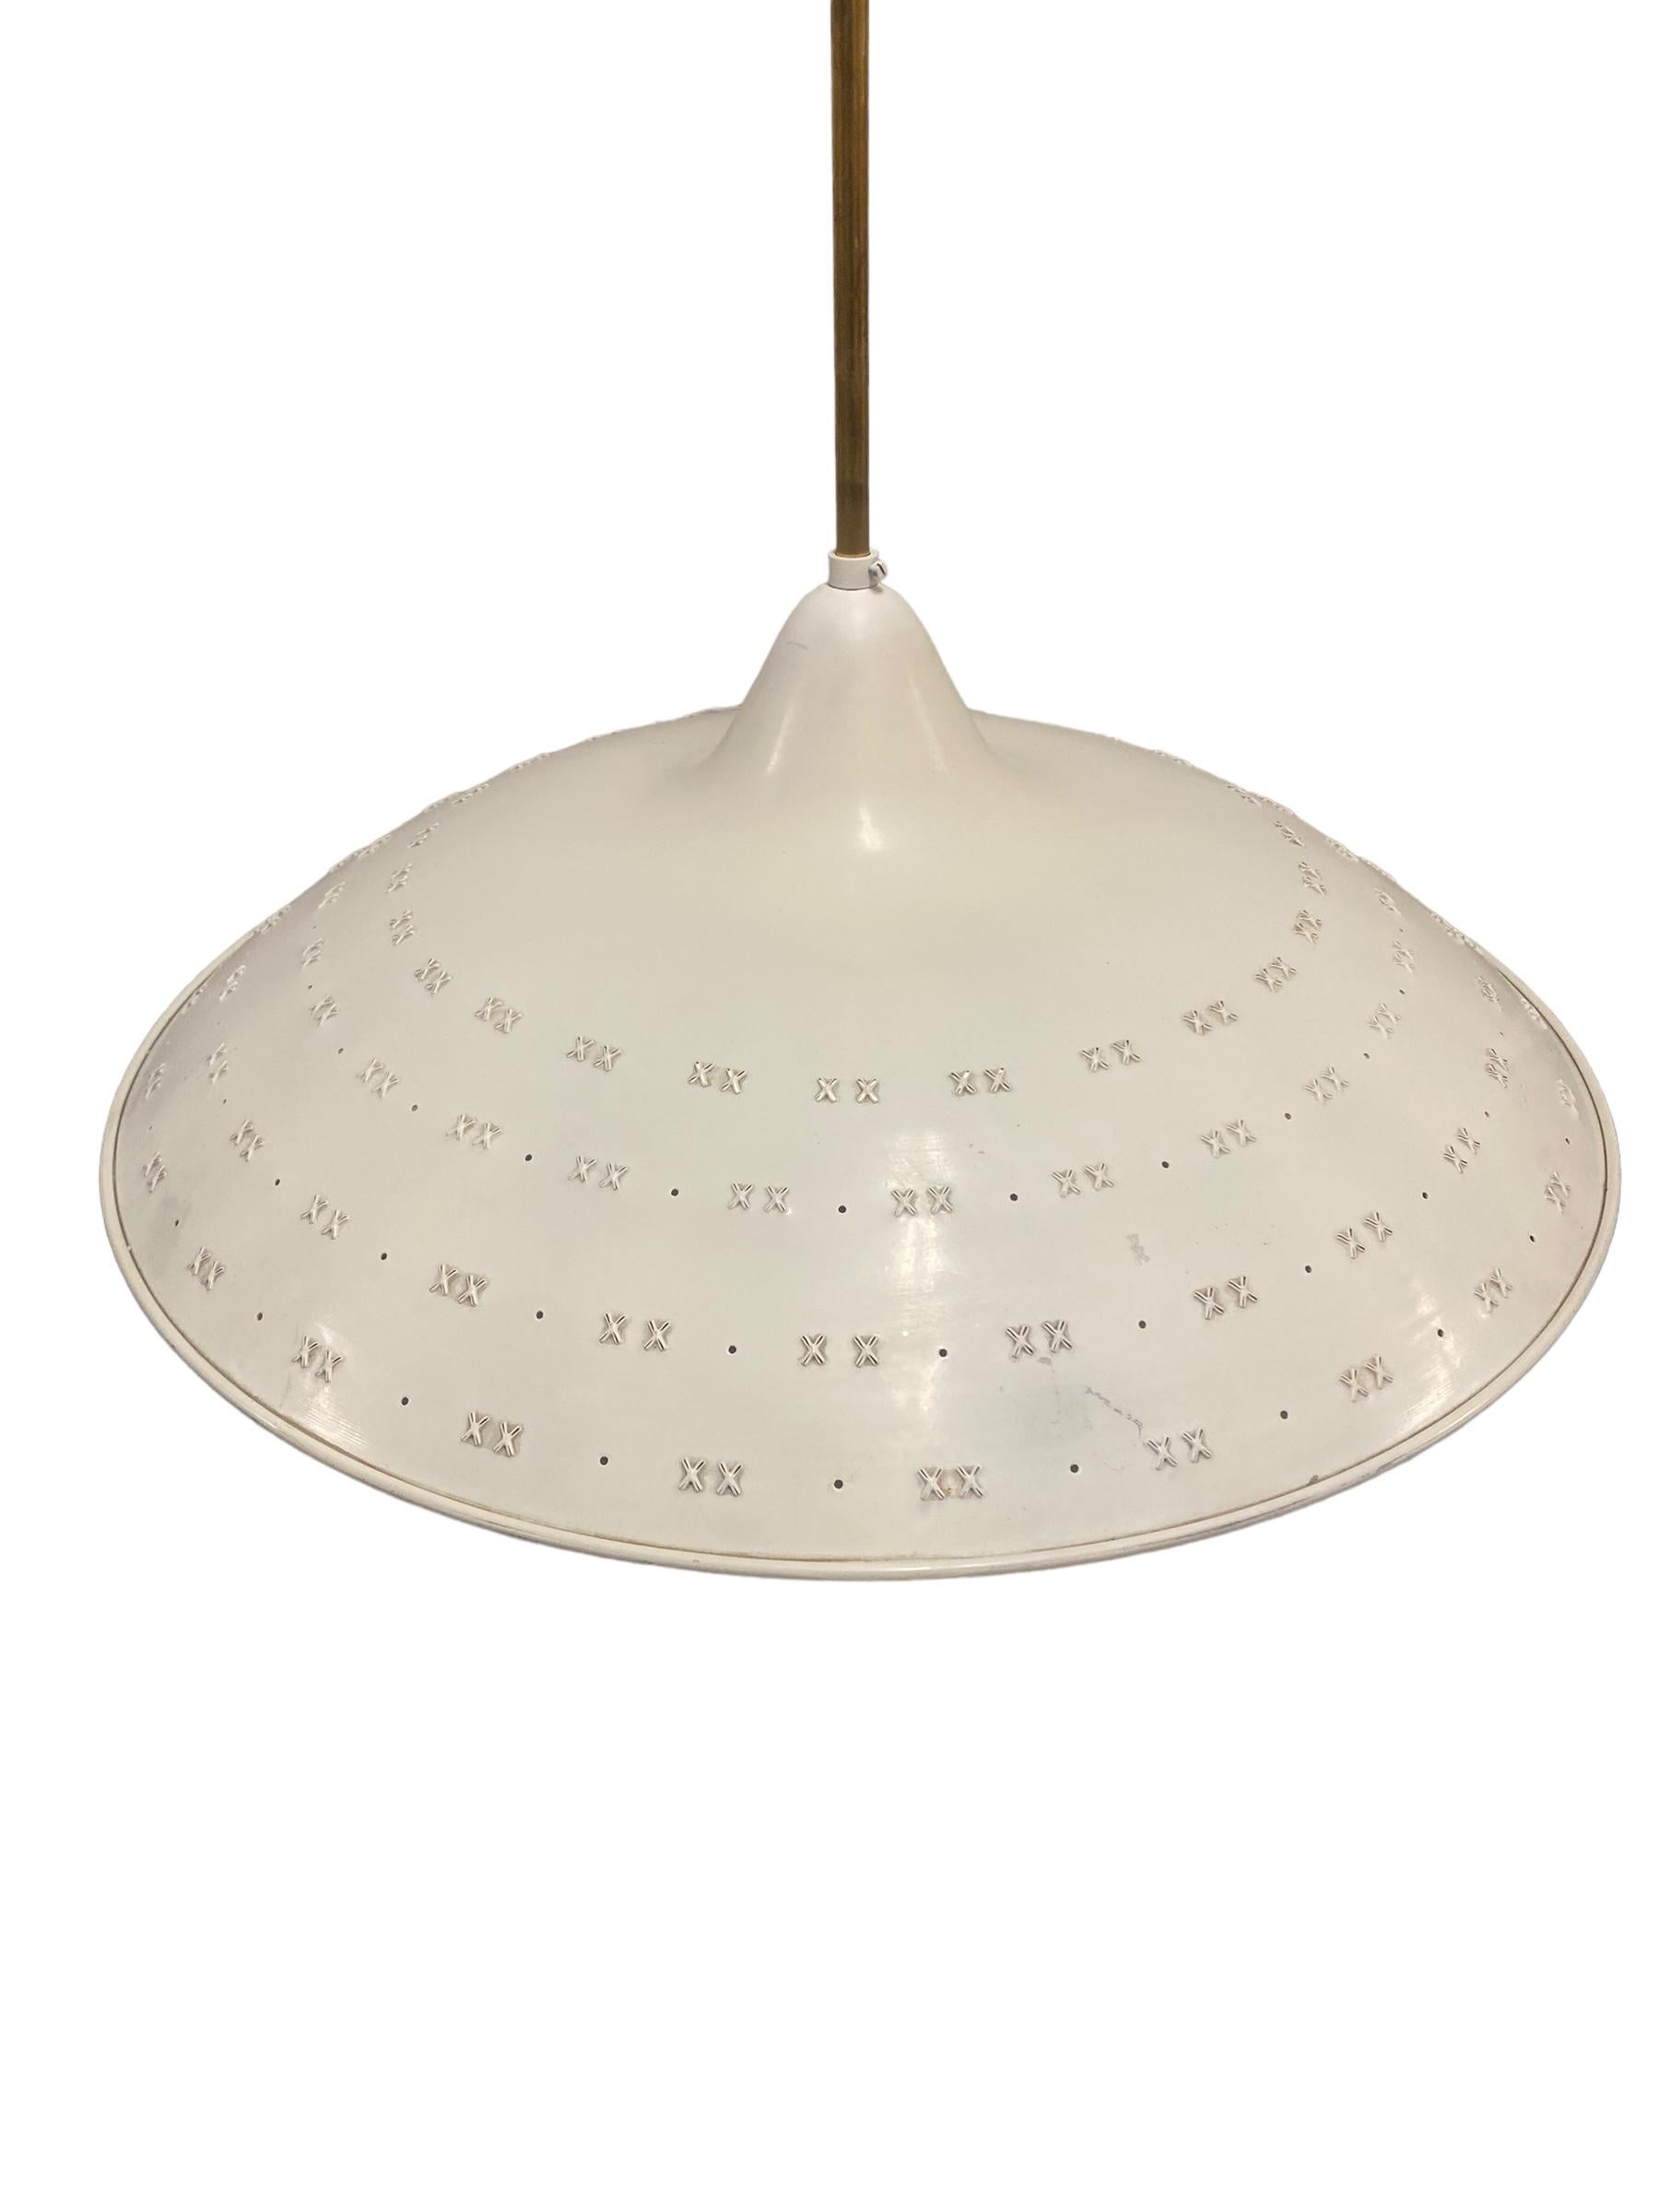 A Rare Lisa-Johansson Pape Ceiling Lamp FN 03-433, Orno 1950s For Sale 2